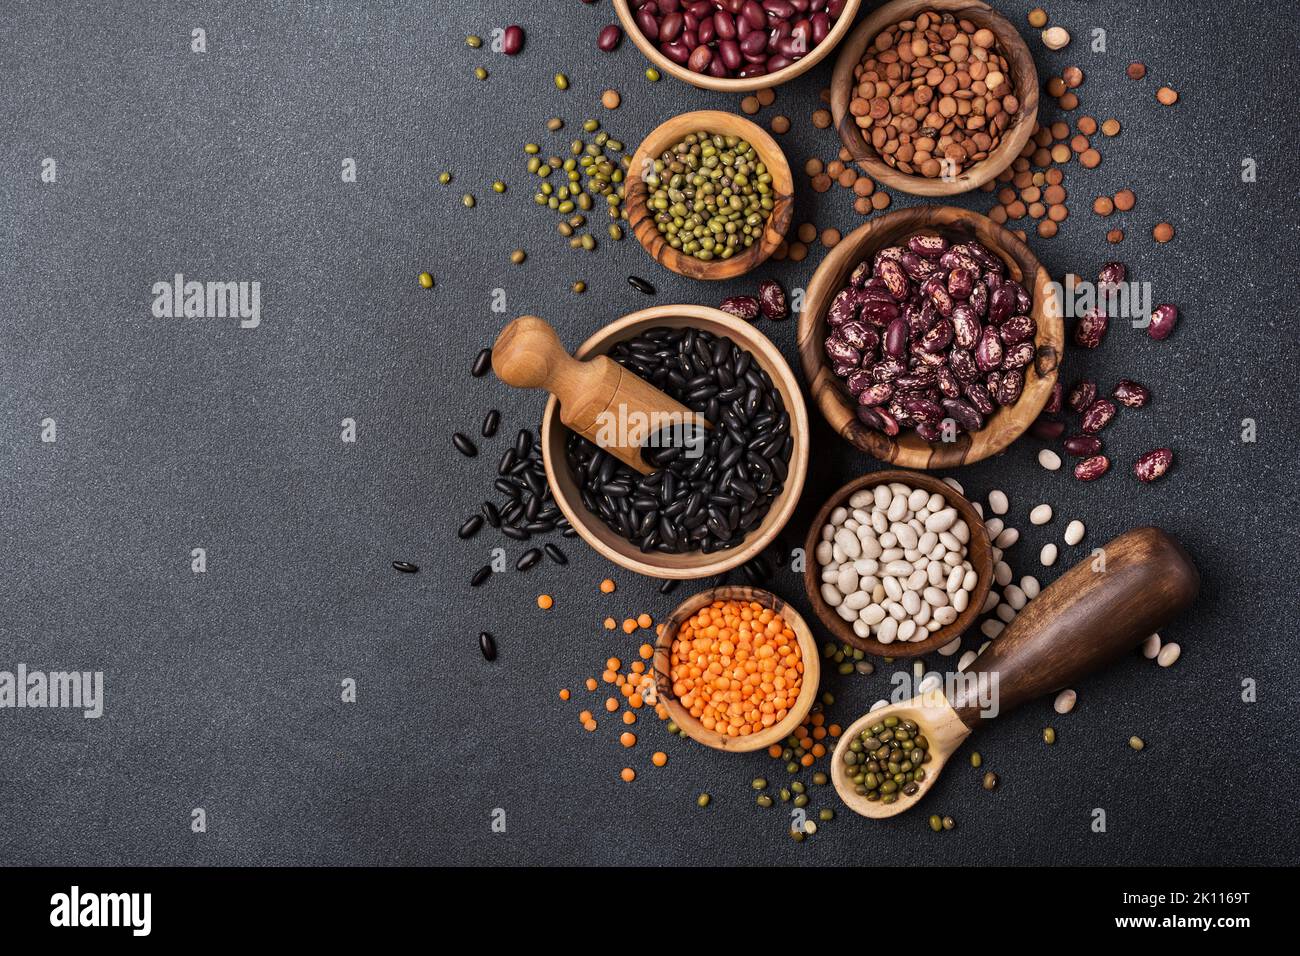 Top view of different beans, lentils, mung or maash in bowls on dark concrete background Stock Photo